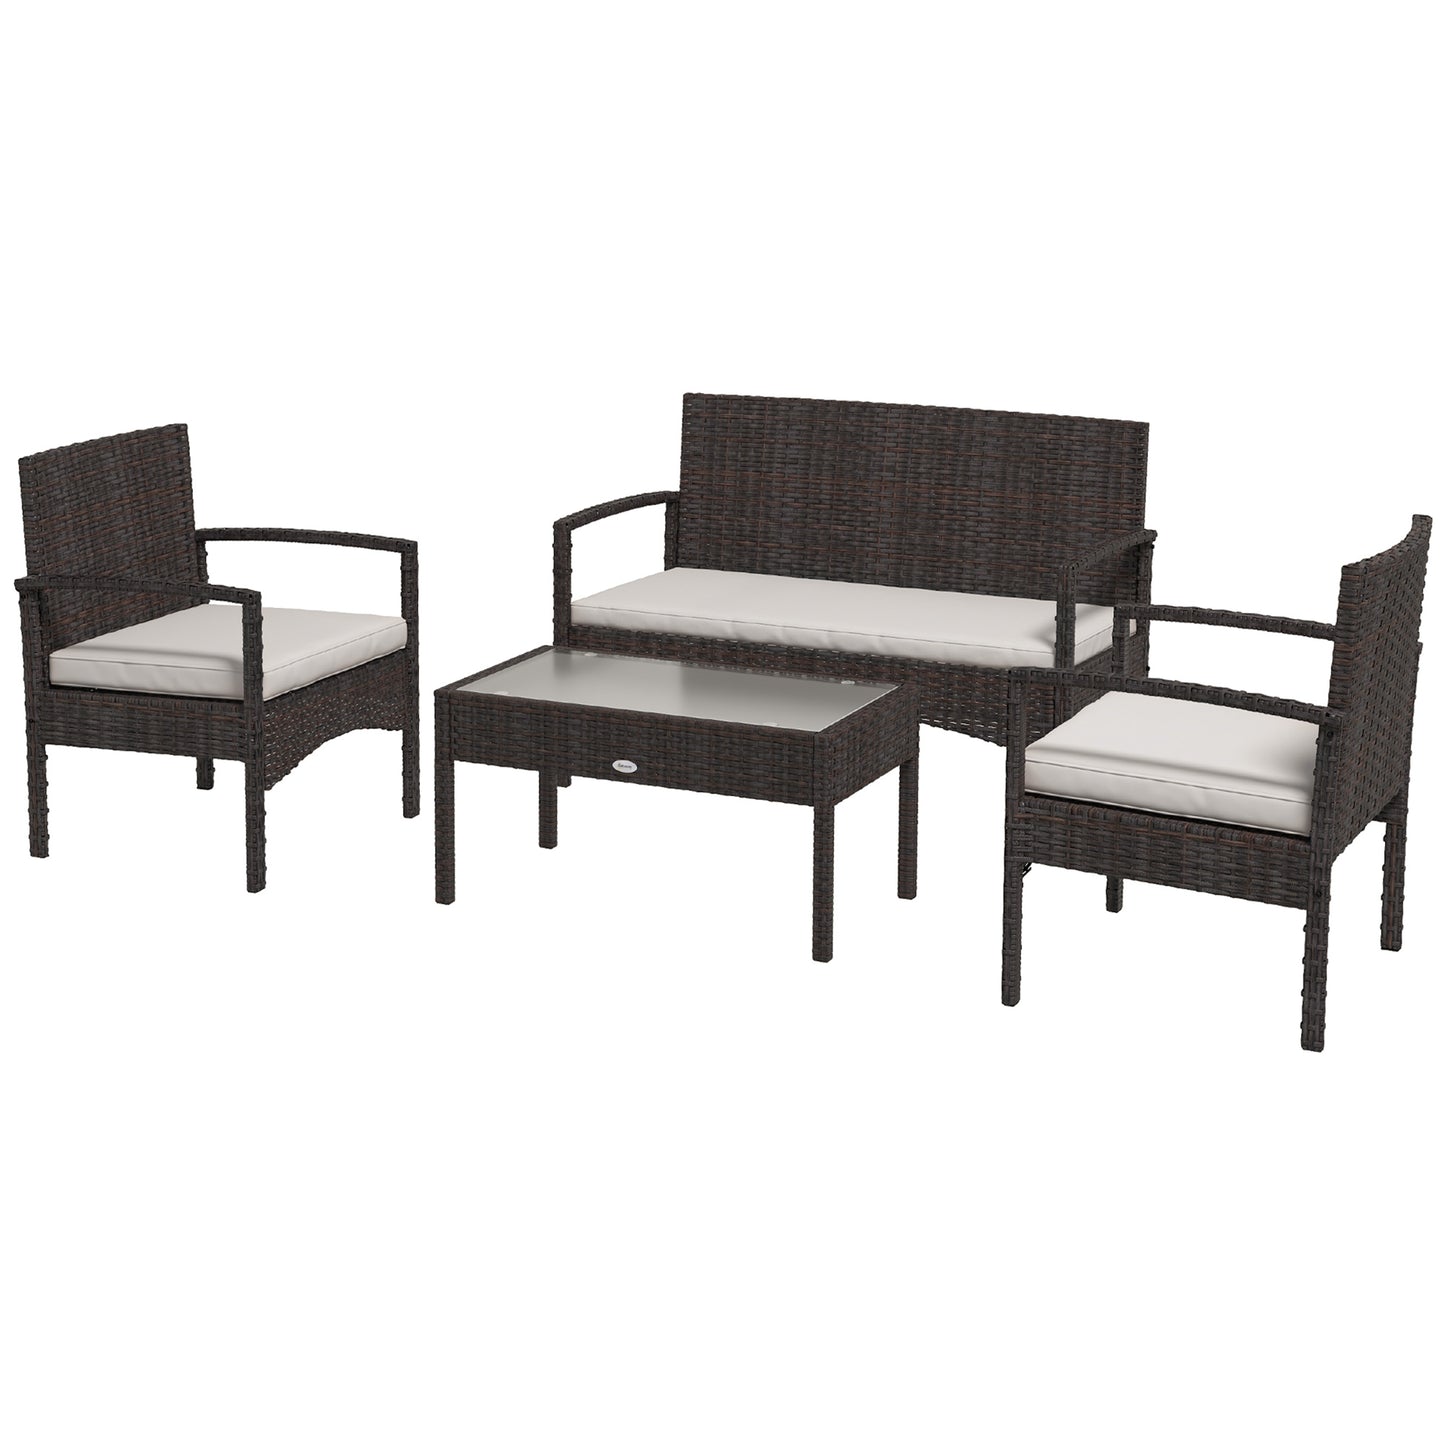 Outsunny 4 Pieces Patio Furniture Set with Loveseat Sofa, Armchairs, Glass Table, Outdoor Wicker Conversation Sofa Set, White